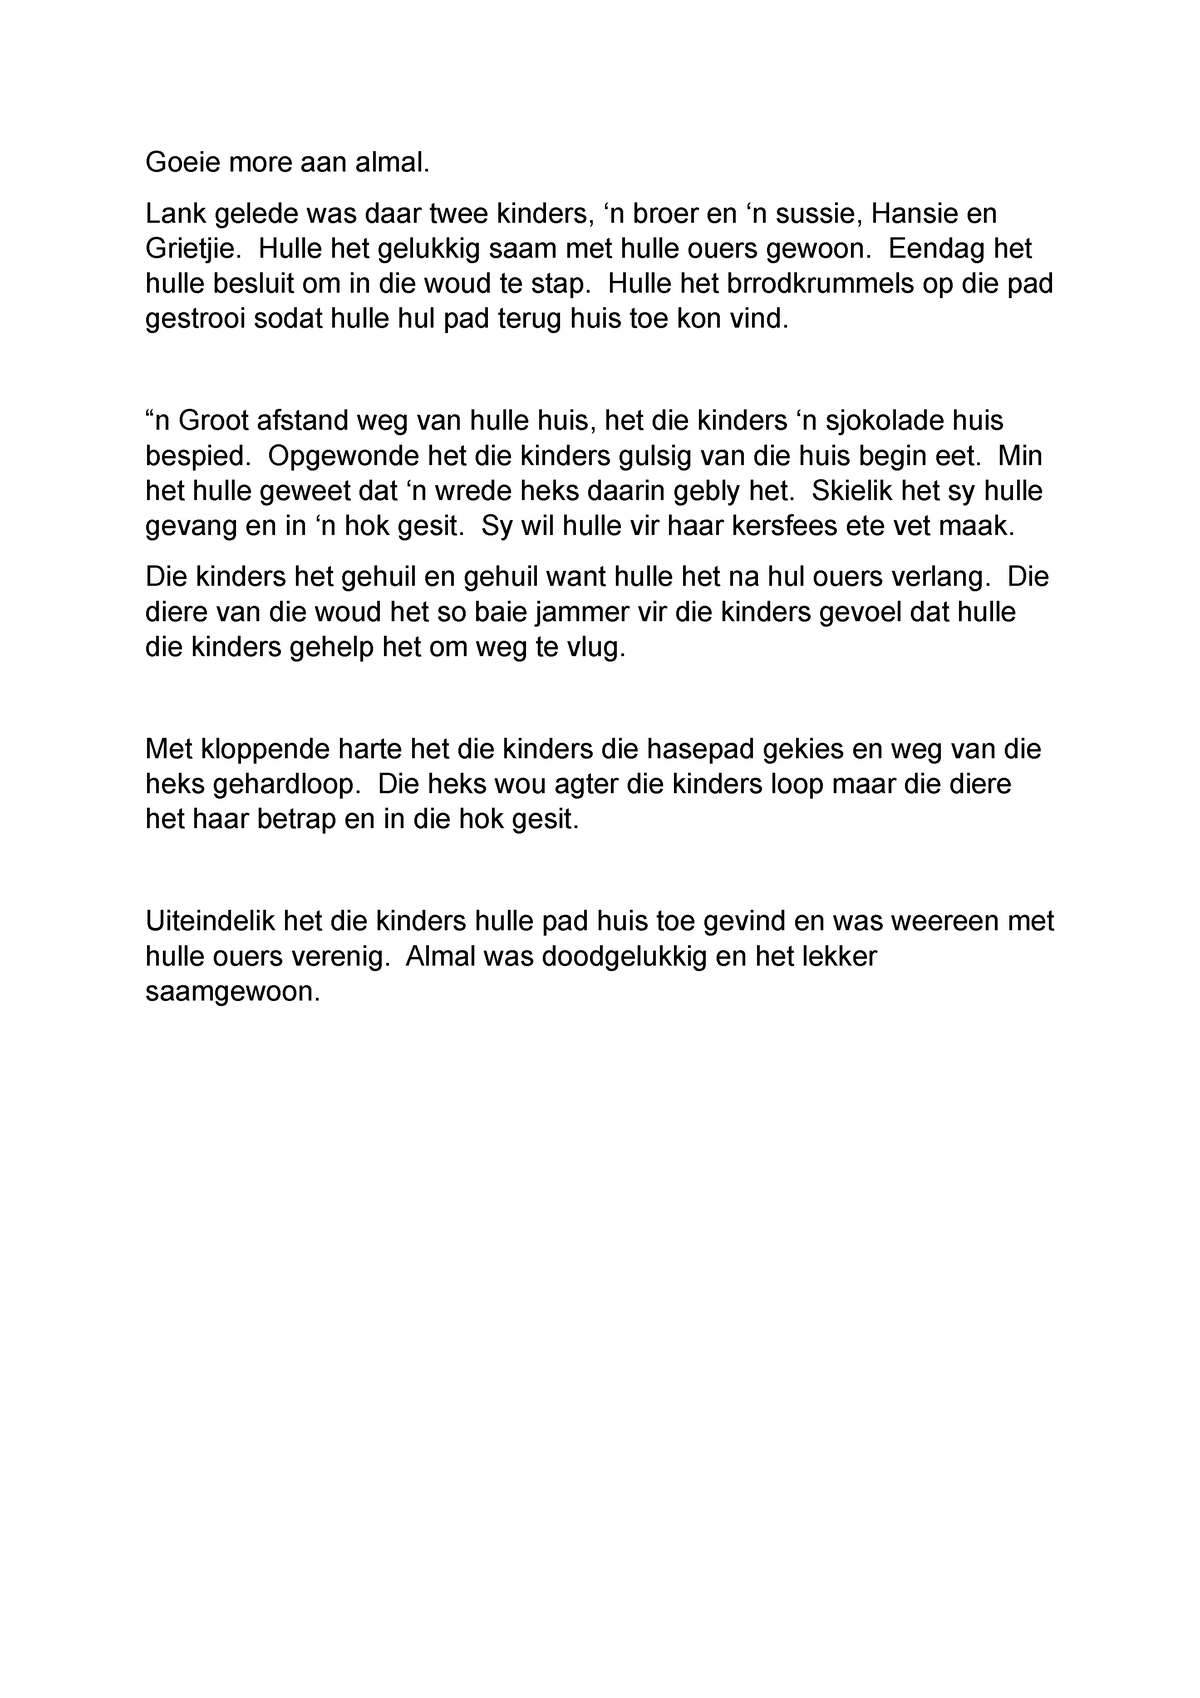 essay about respect in afrikaans